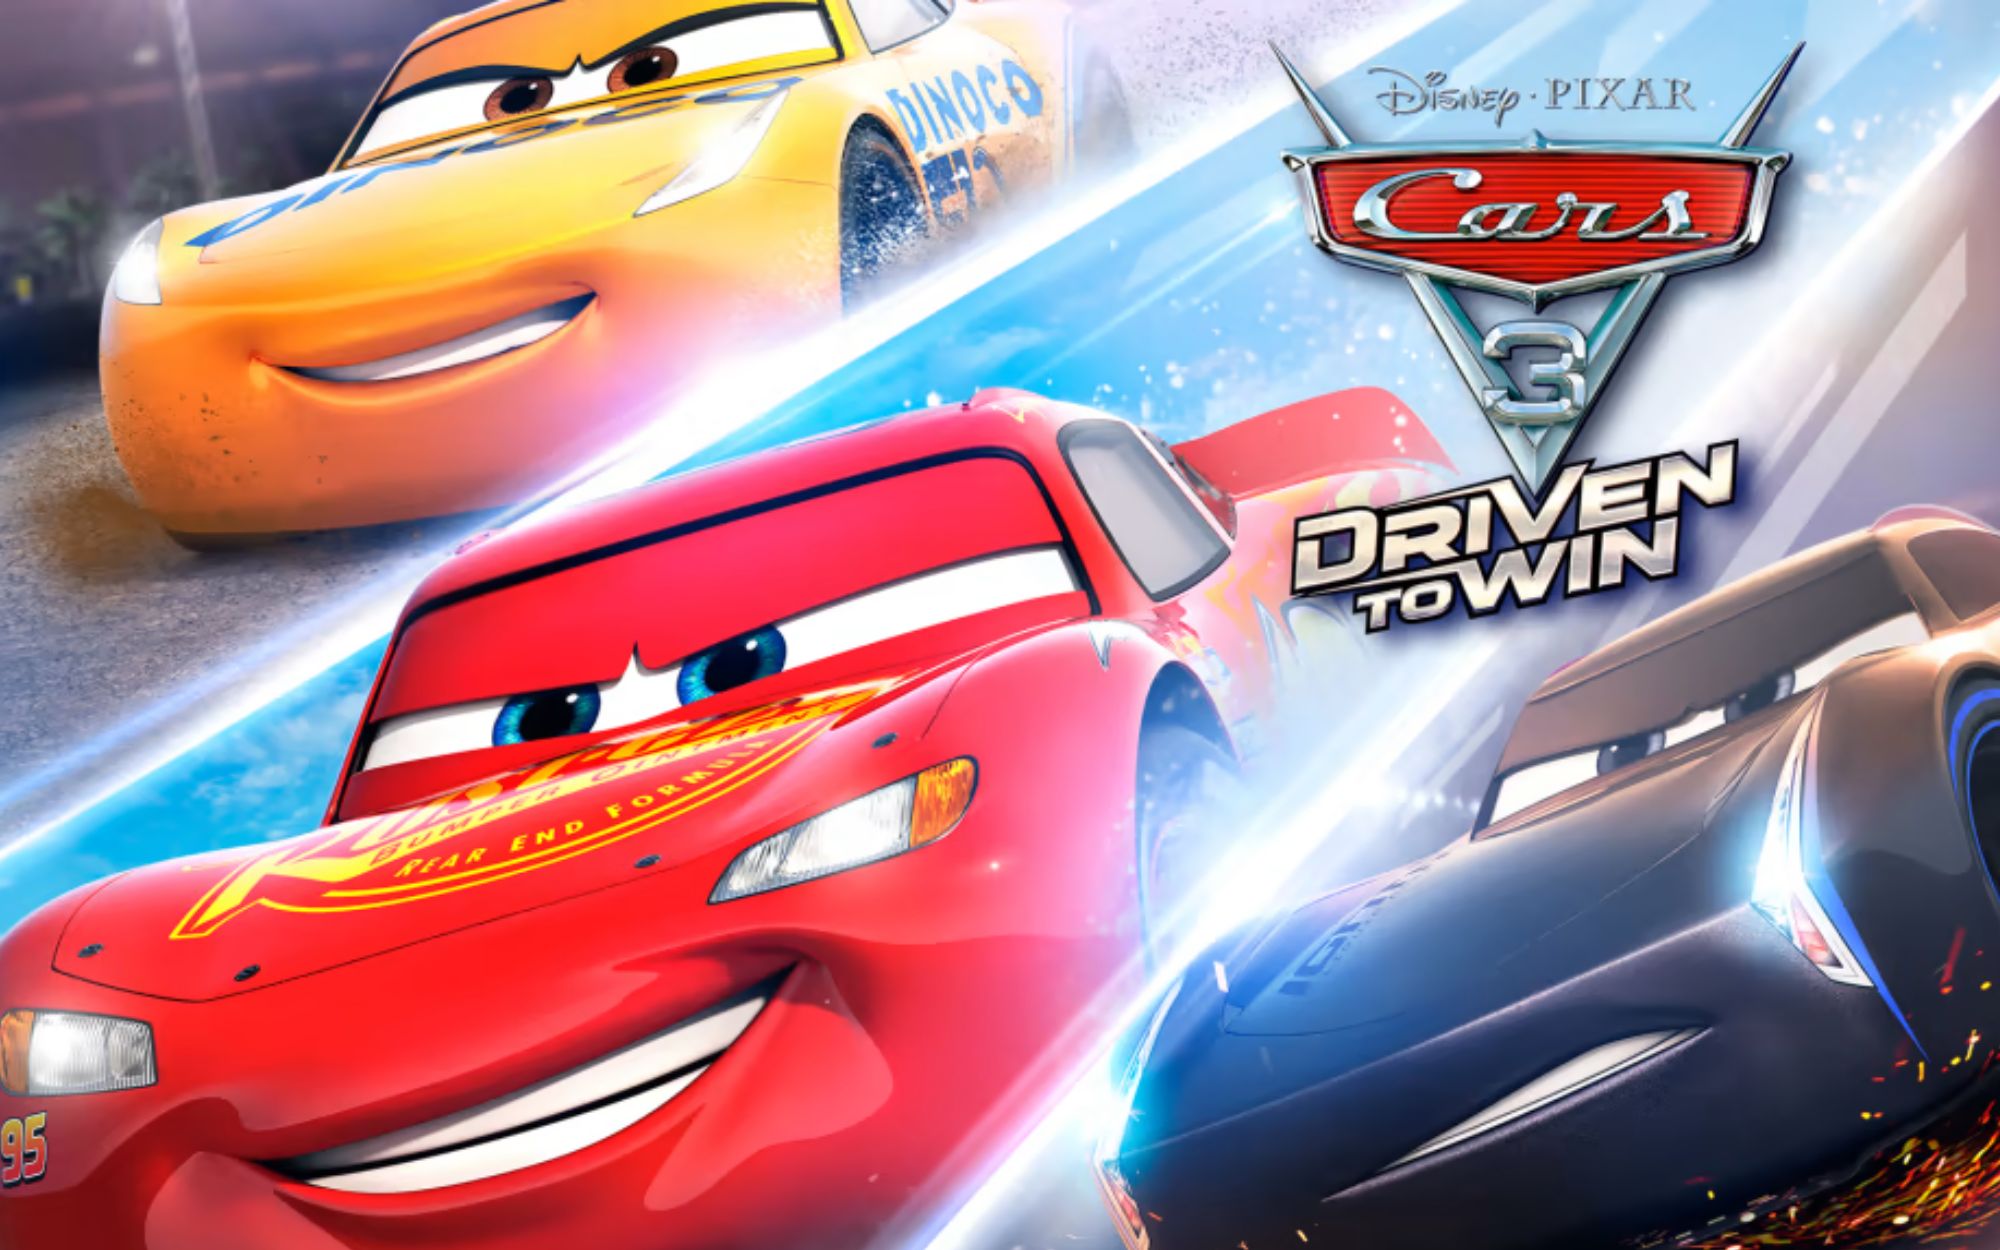 The Cars 3: Driven to Win game is based on the film "Cars," which stars Lightning McQueen (in the centre), Cruz Ramirez (upper), and Jackson Storm (in the right corner)